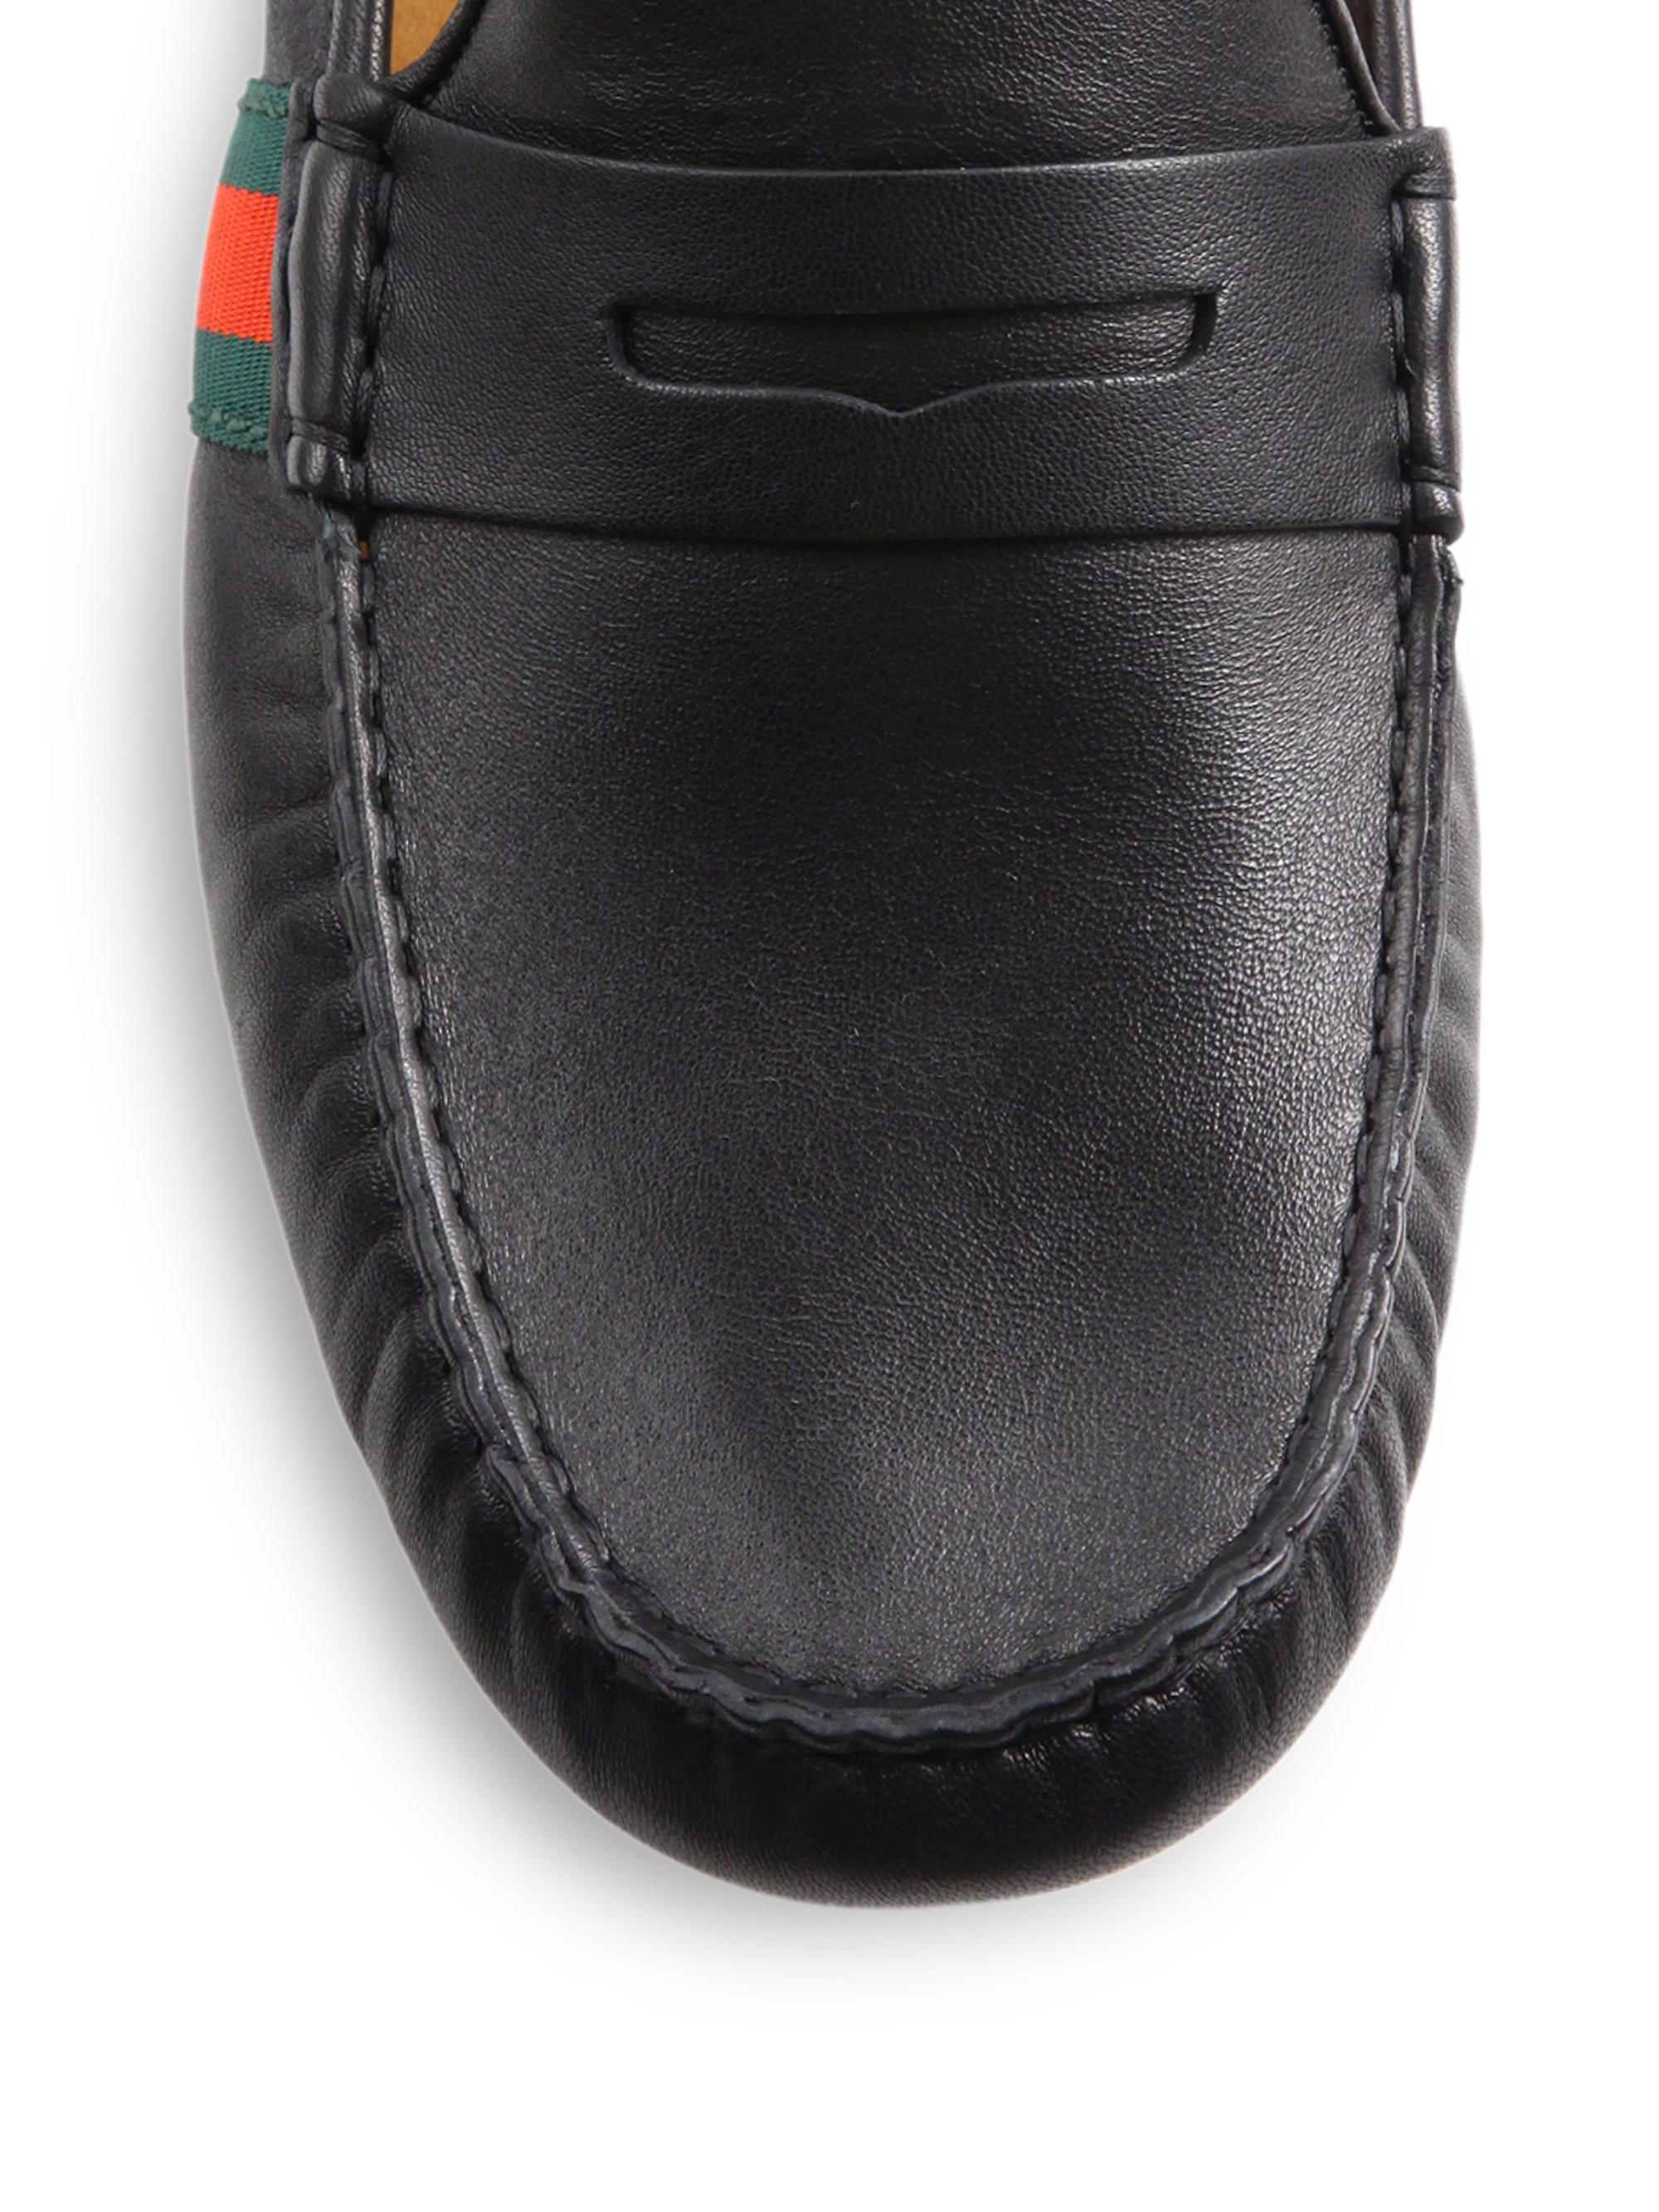 Gucci Signature Web Leather Drivers in Black for Men - Lyst